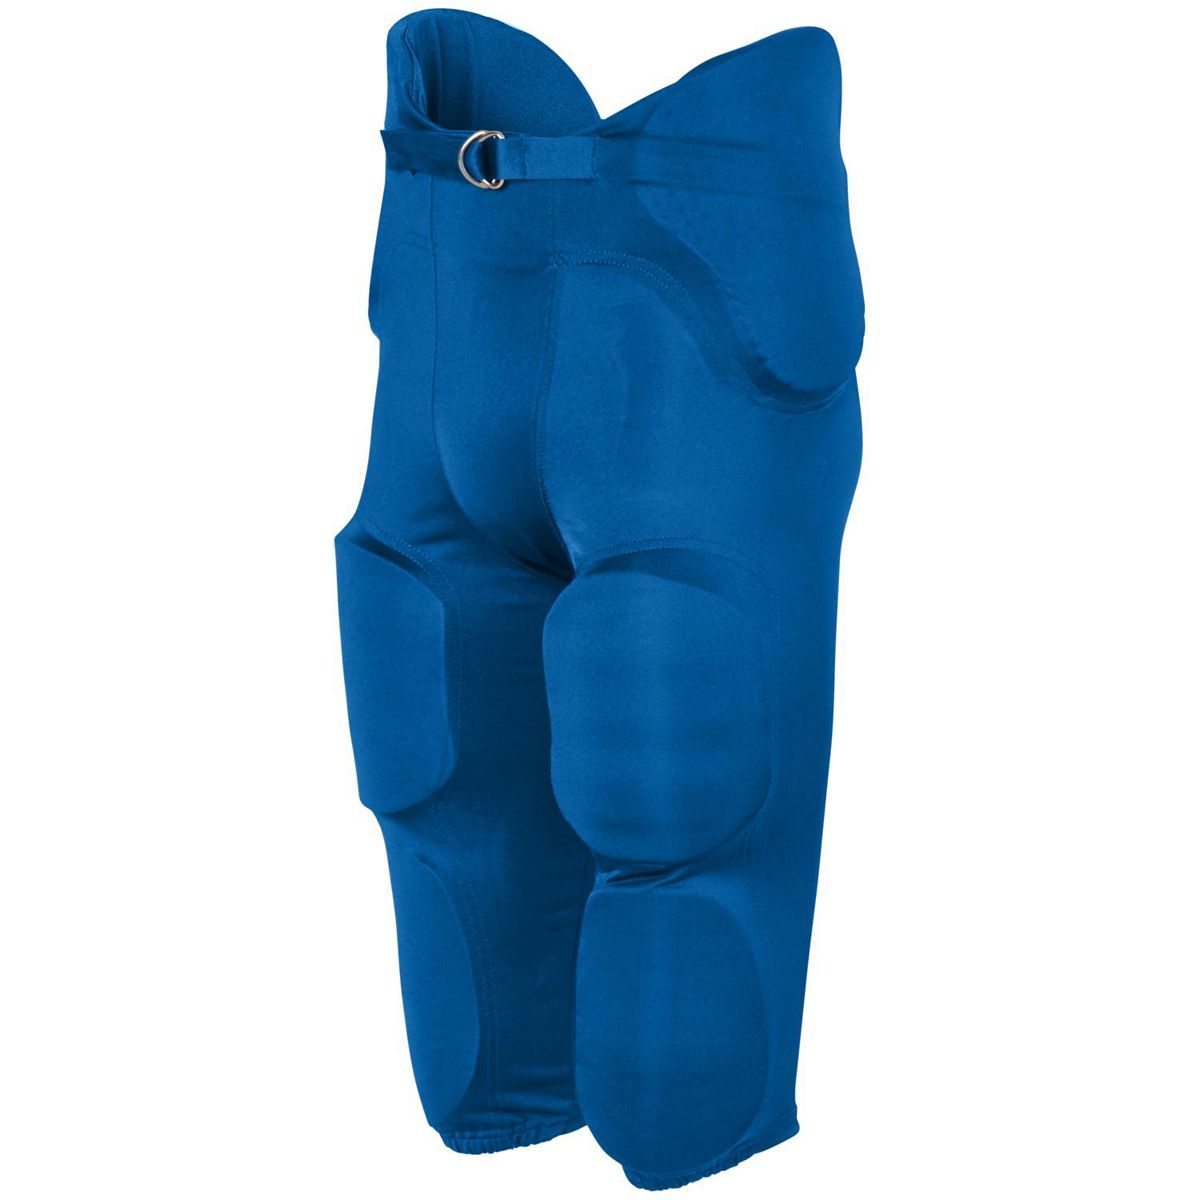 Augusta Sportswear Phantom Integrated Pant in Royal  -Part of the Adult, Adult-Pants, Pants, Augusta-Products, Football, All-Sports, All-Sports-1 product lines at KanaleyCreations.com